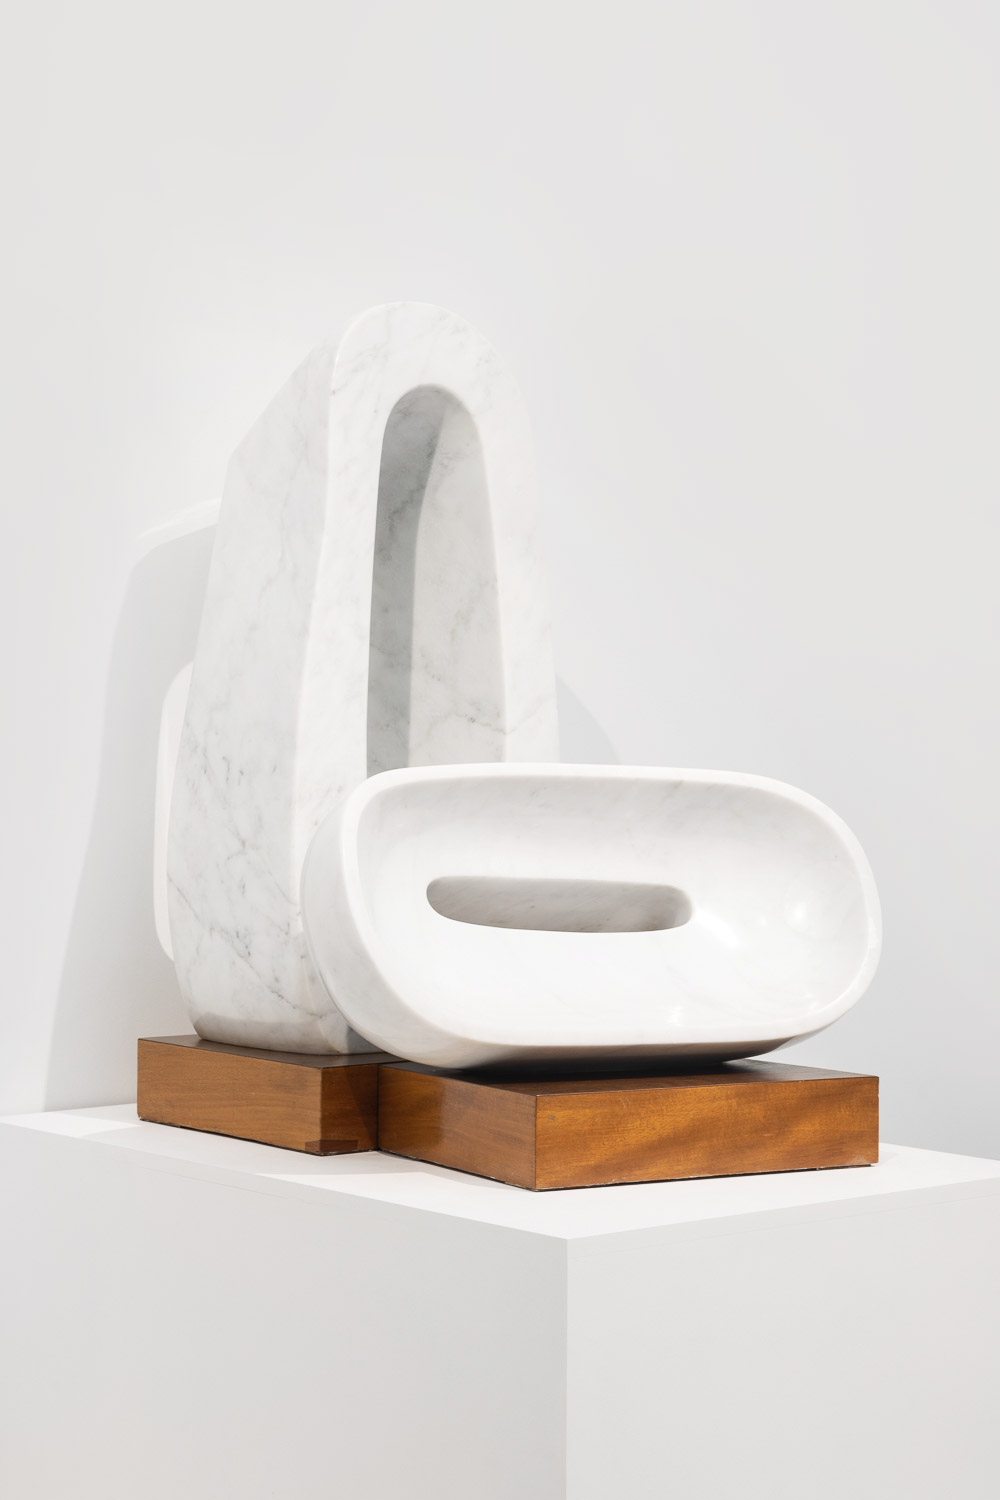 Installation view, Barbara Hepworth: Art & Life, 27 May to 3 September 2023, Towner Eastbourne. Photo by Rob Harris.